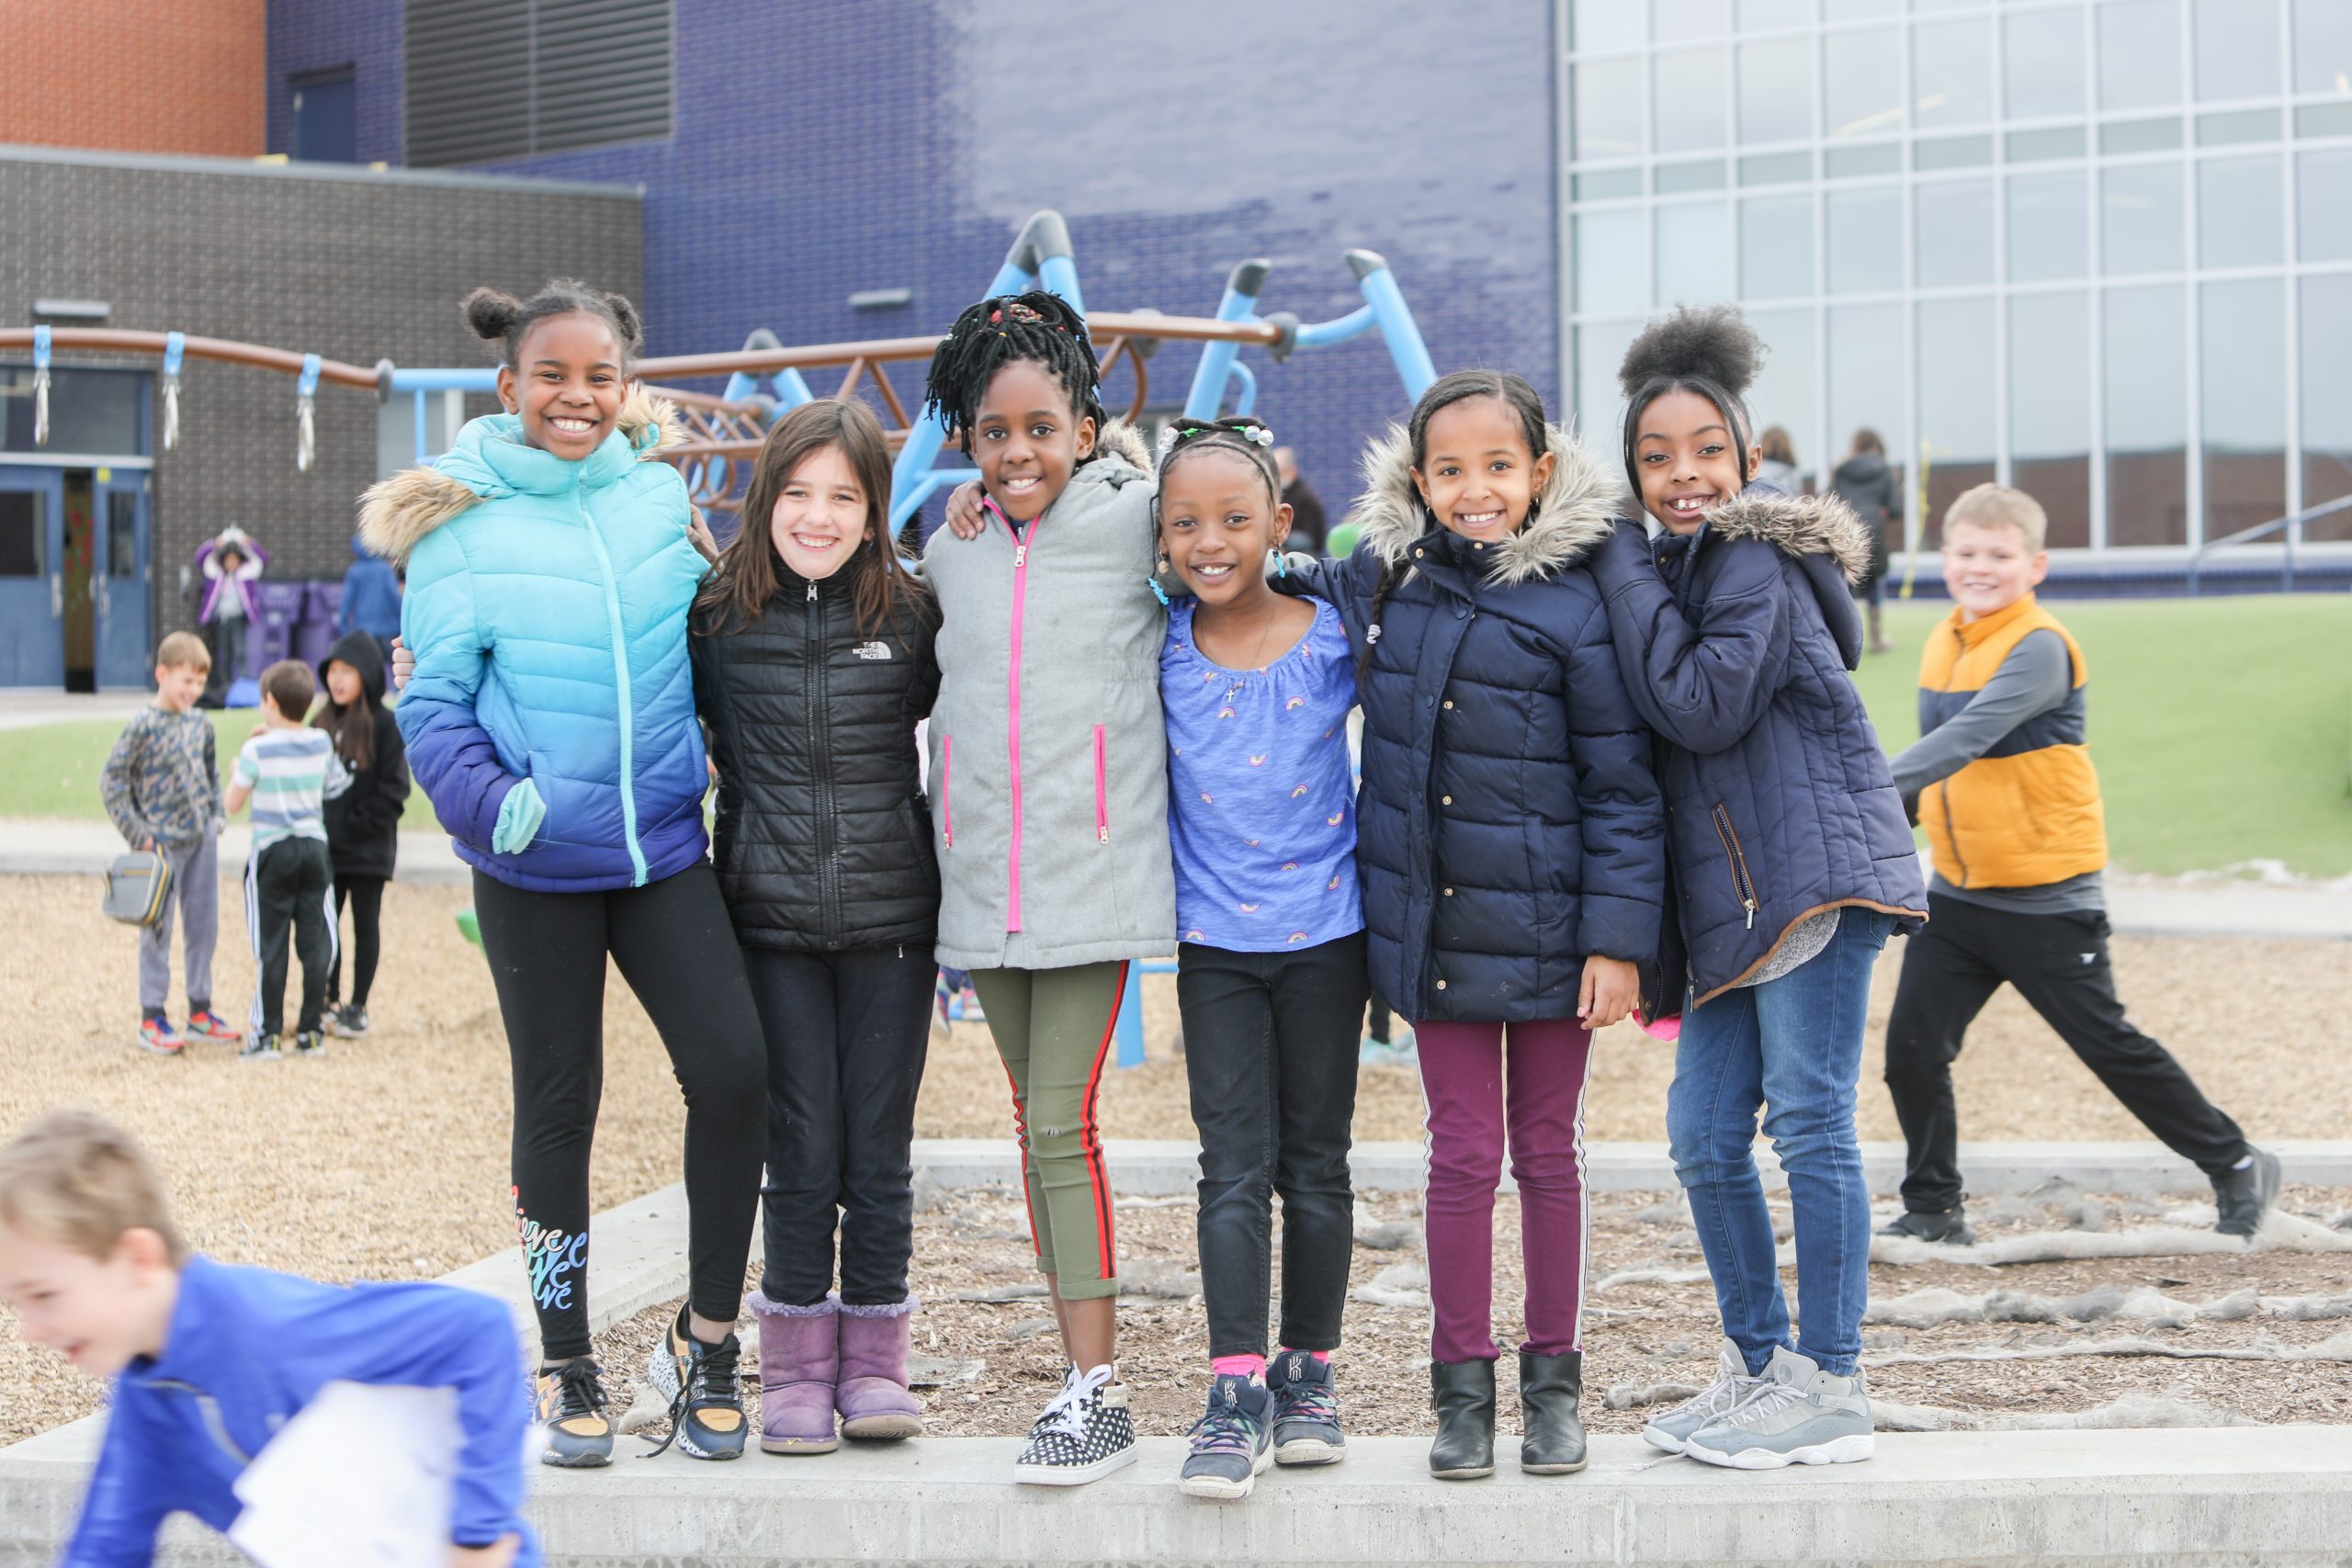 Group of young girls posing for photo at school playground